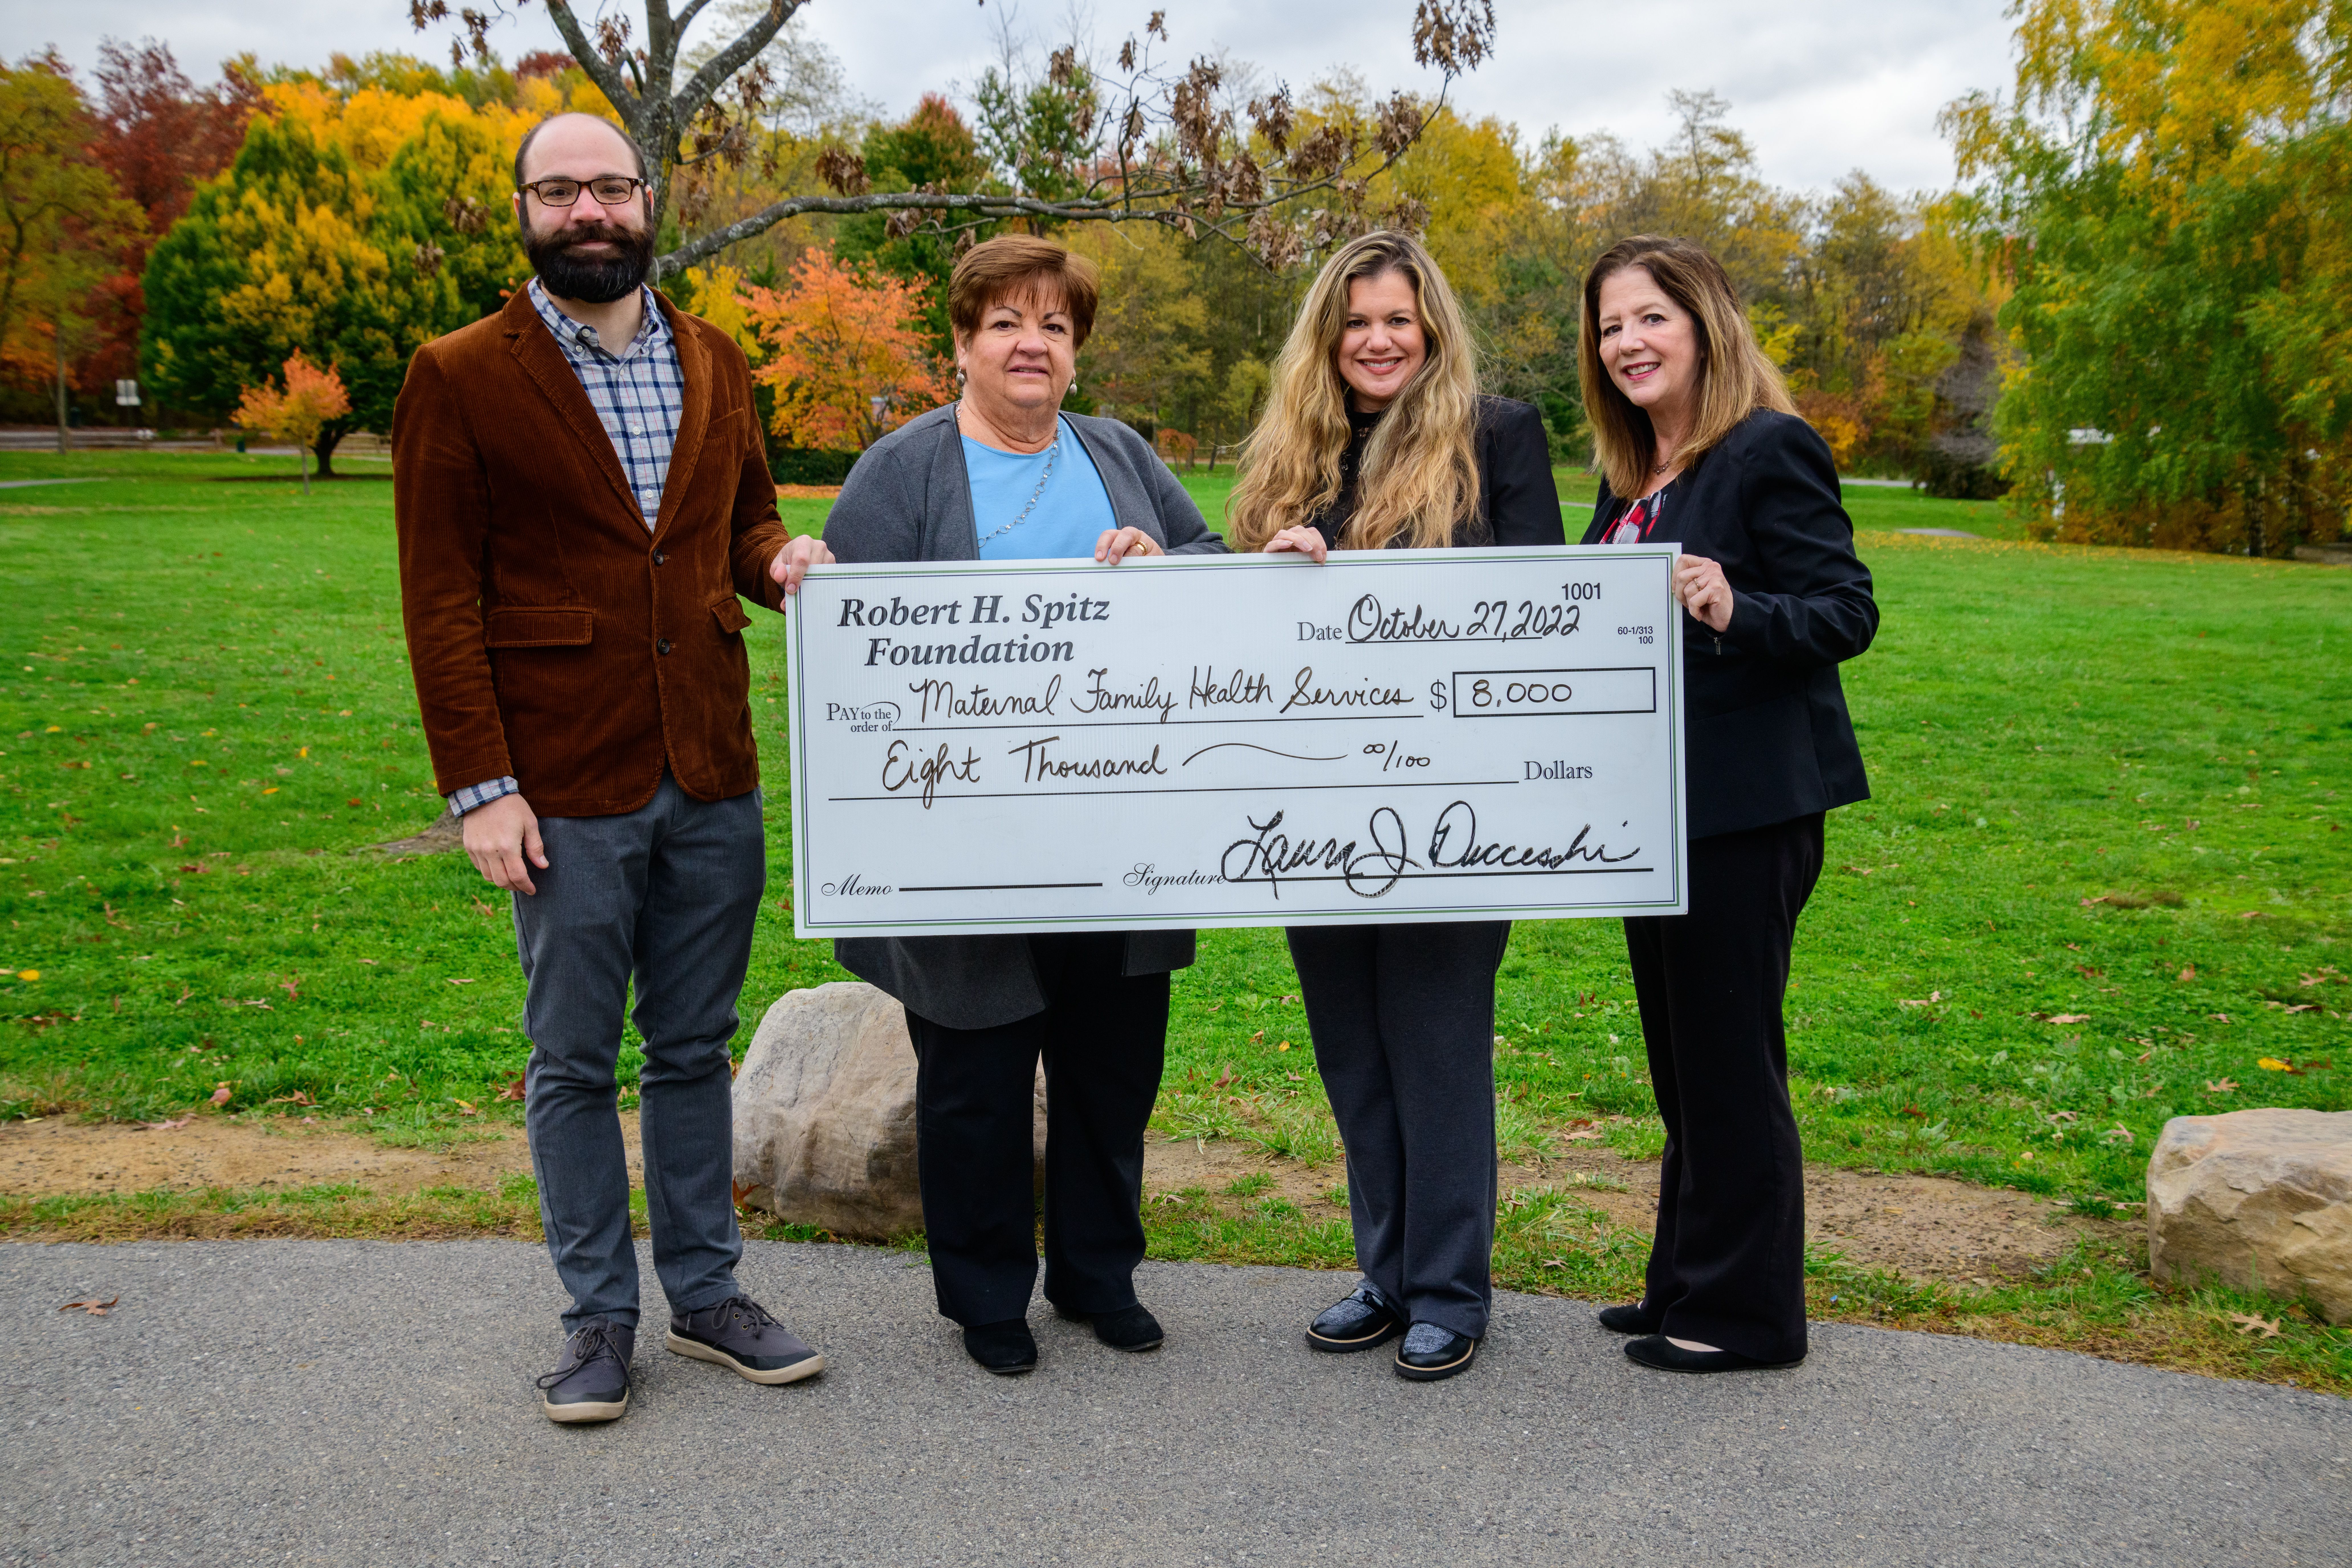 Maternal & Family Health Services Awarded $8,000 by Robert H. Spitz Foundation for Infant and Child Safety and Mentoring Project Featured Image